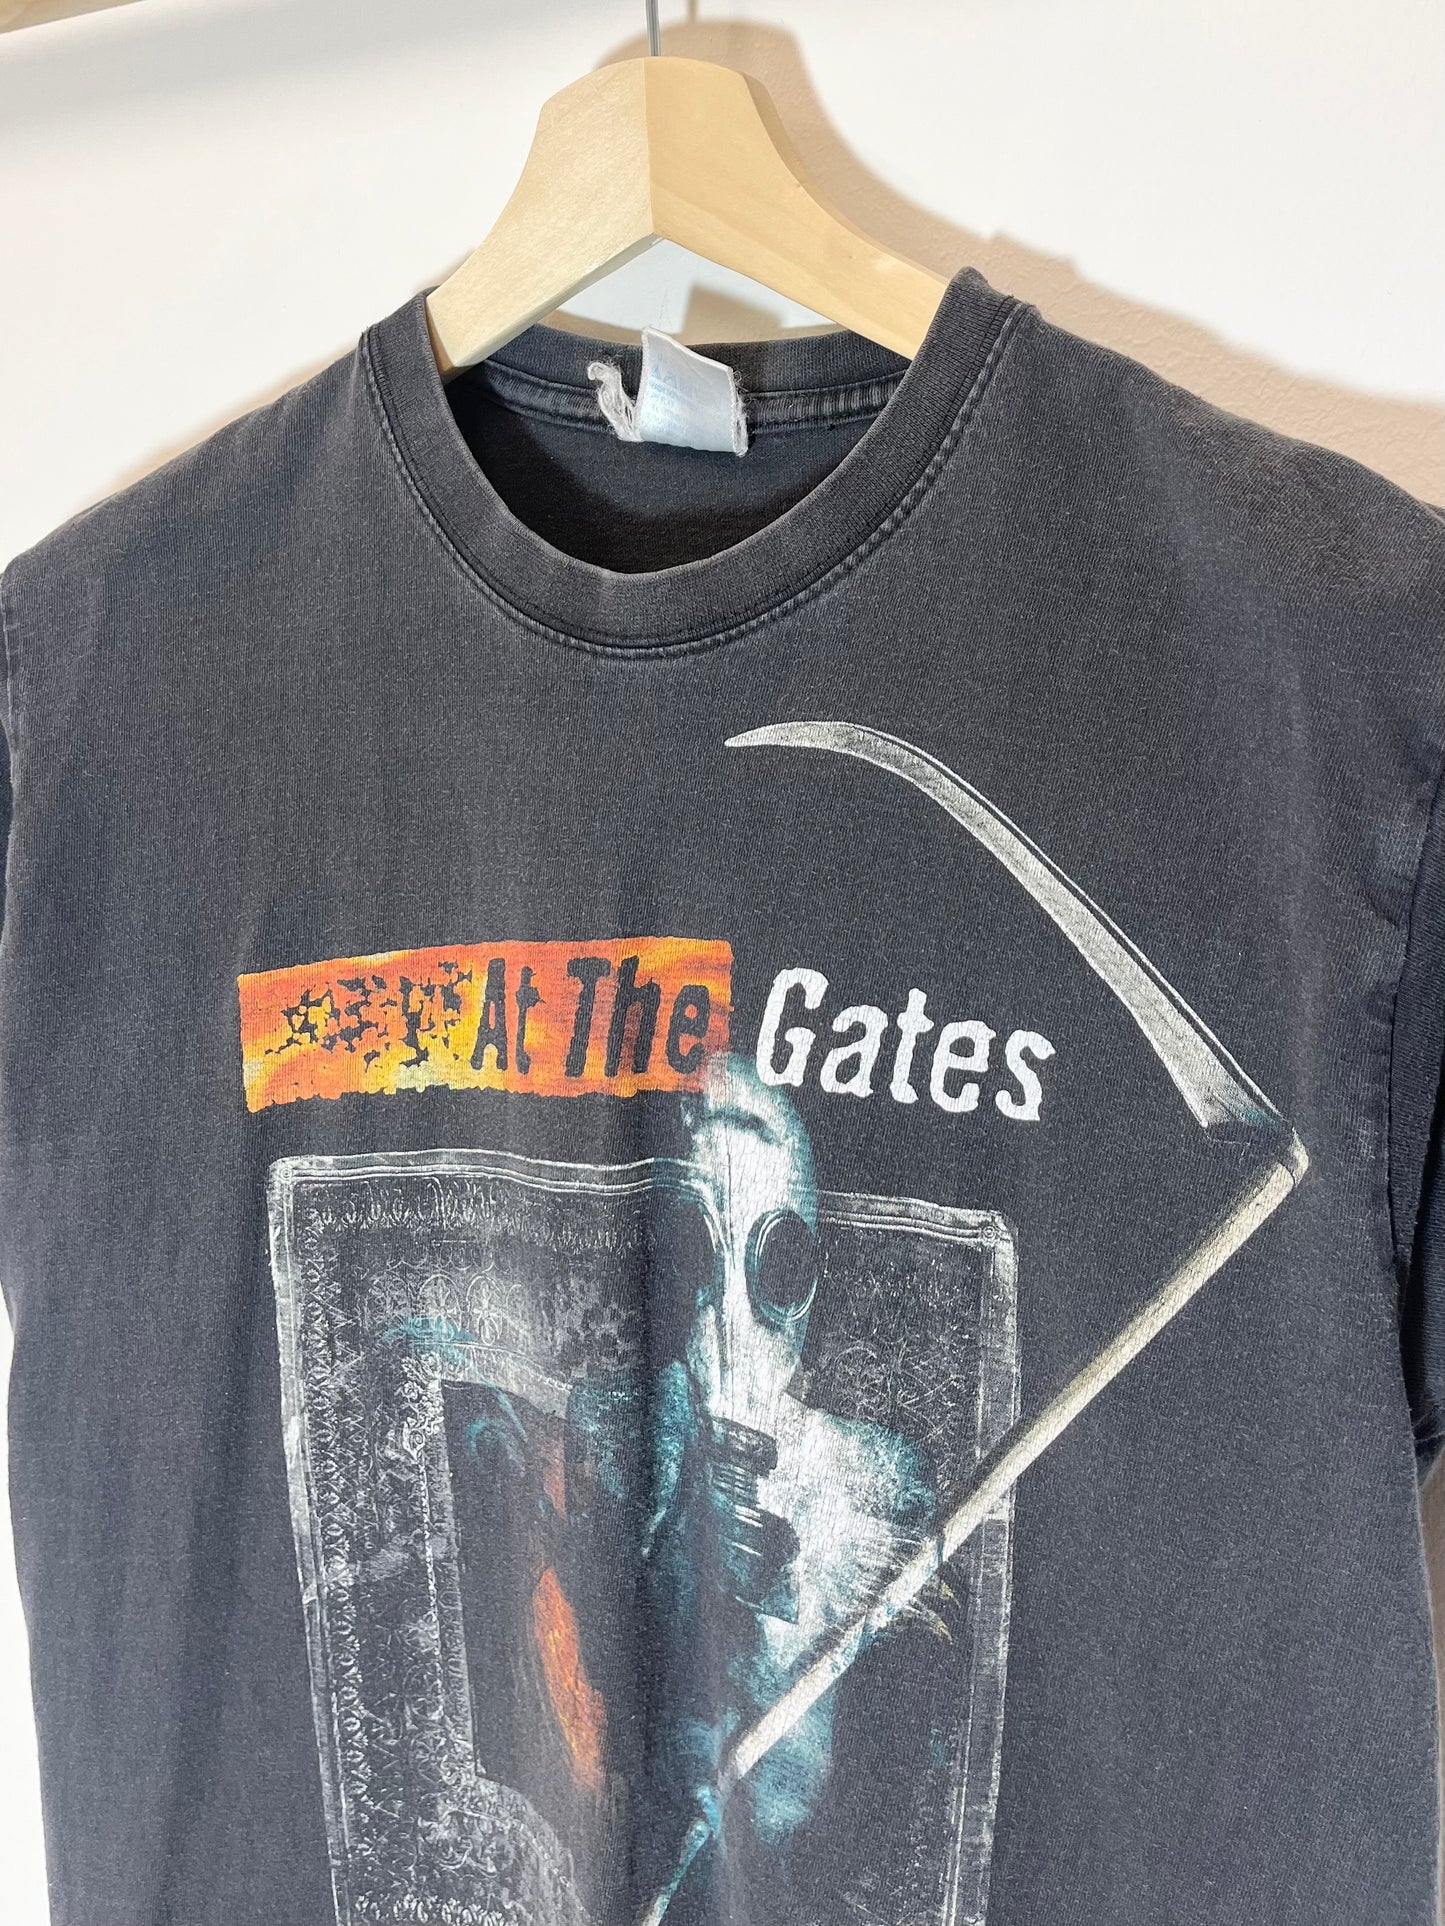 At The Gate - Vintage T-shirt